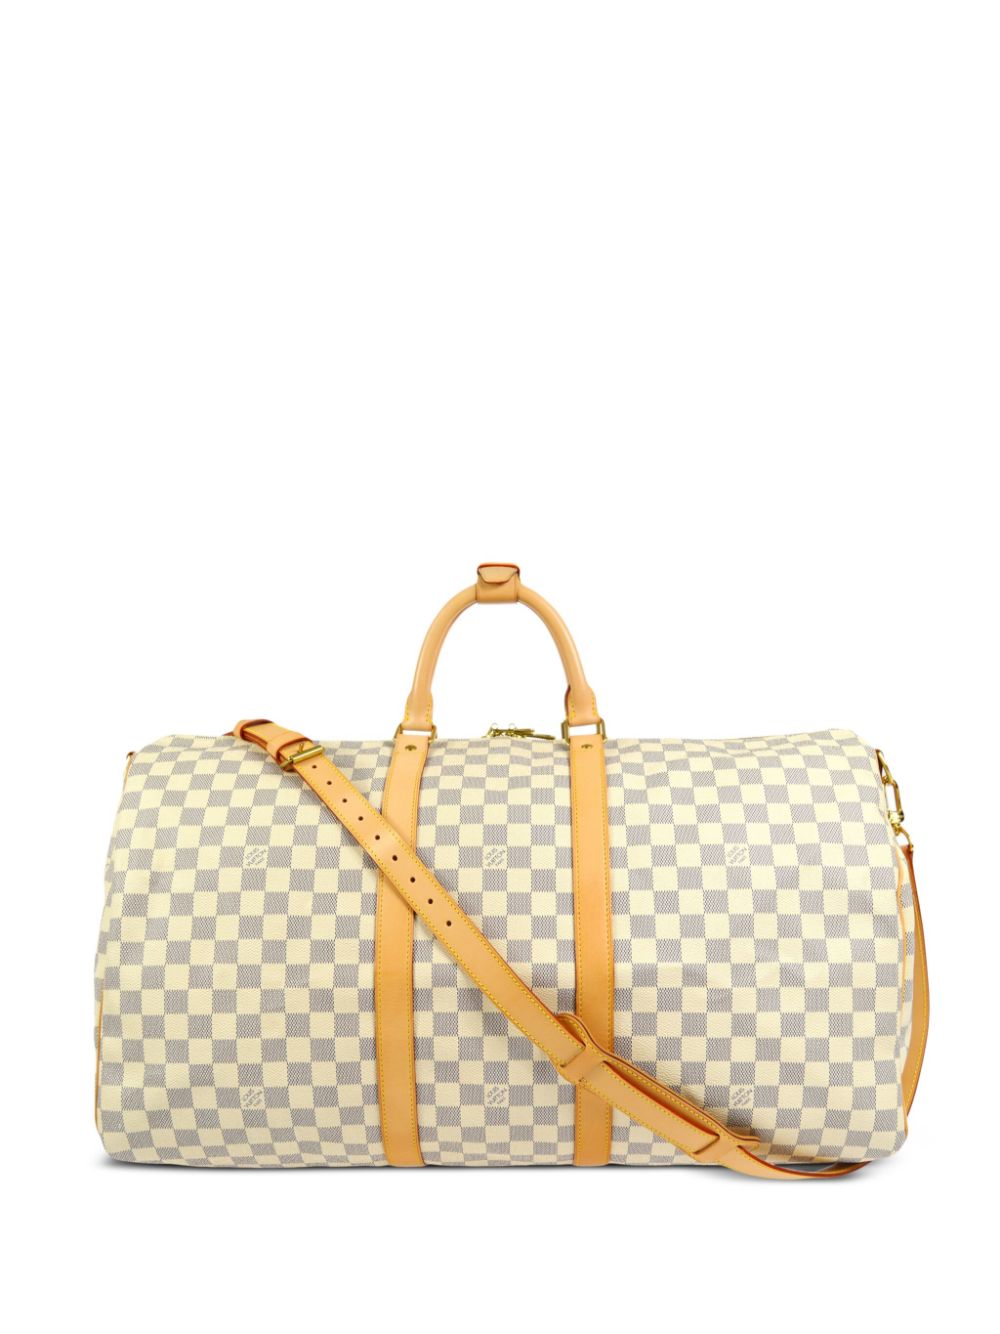 Louis Vuitton 2009 pre-owned Keepall Bandouliere 55 travel bag - White